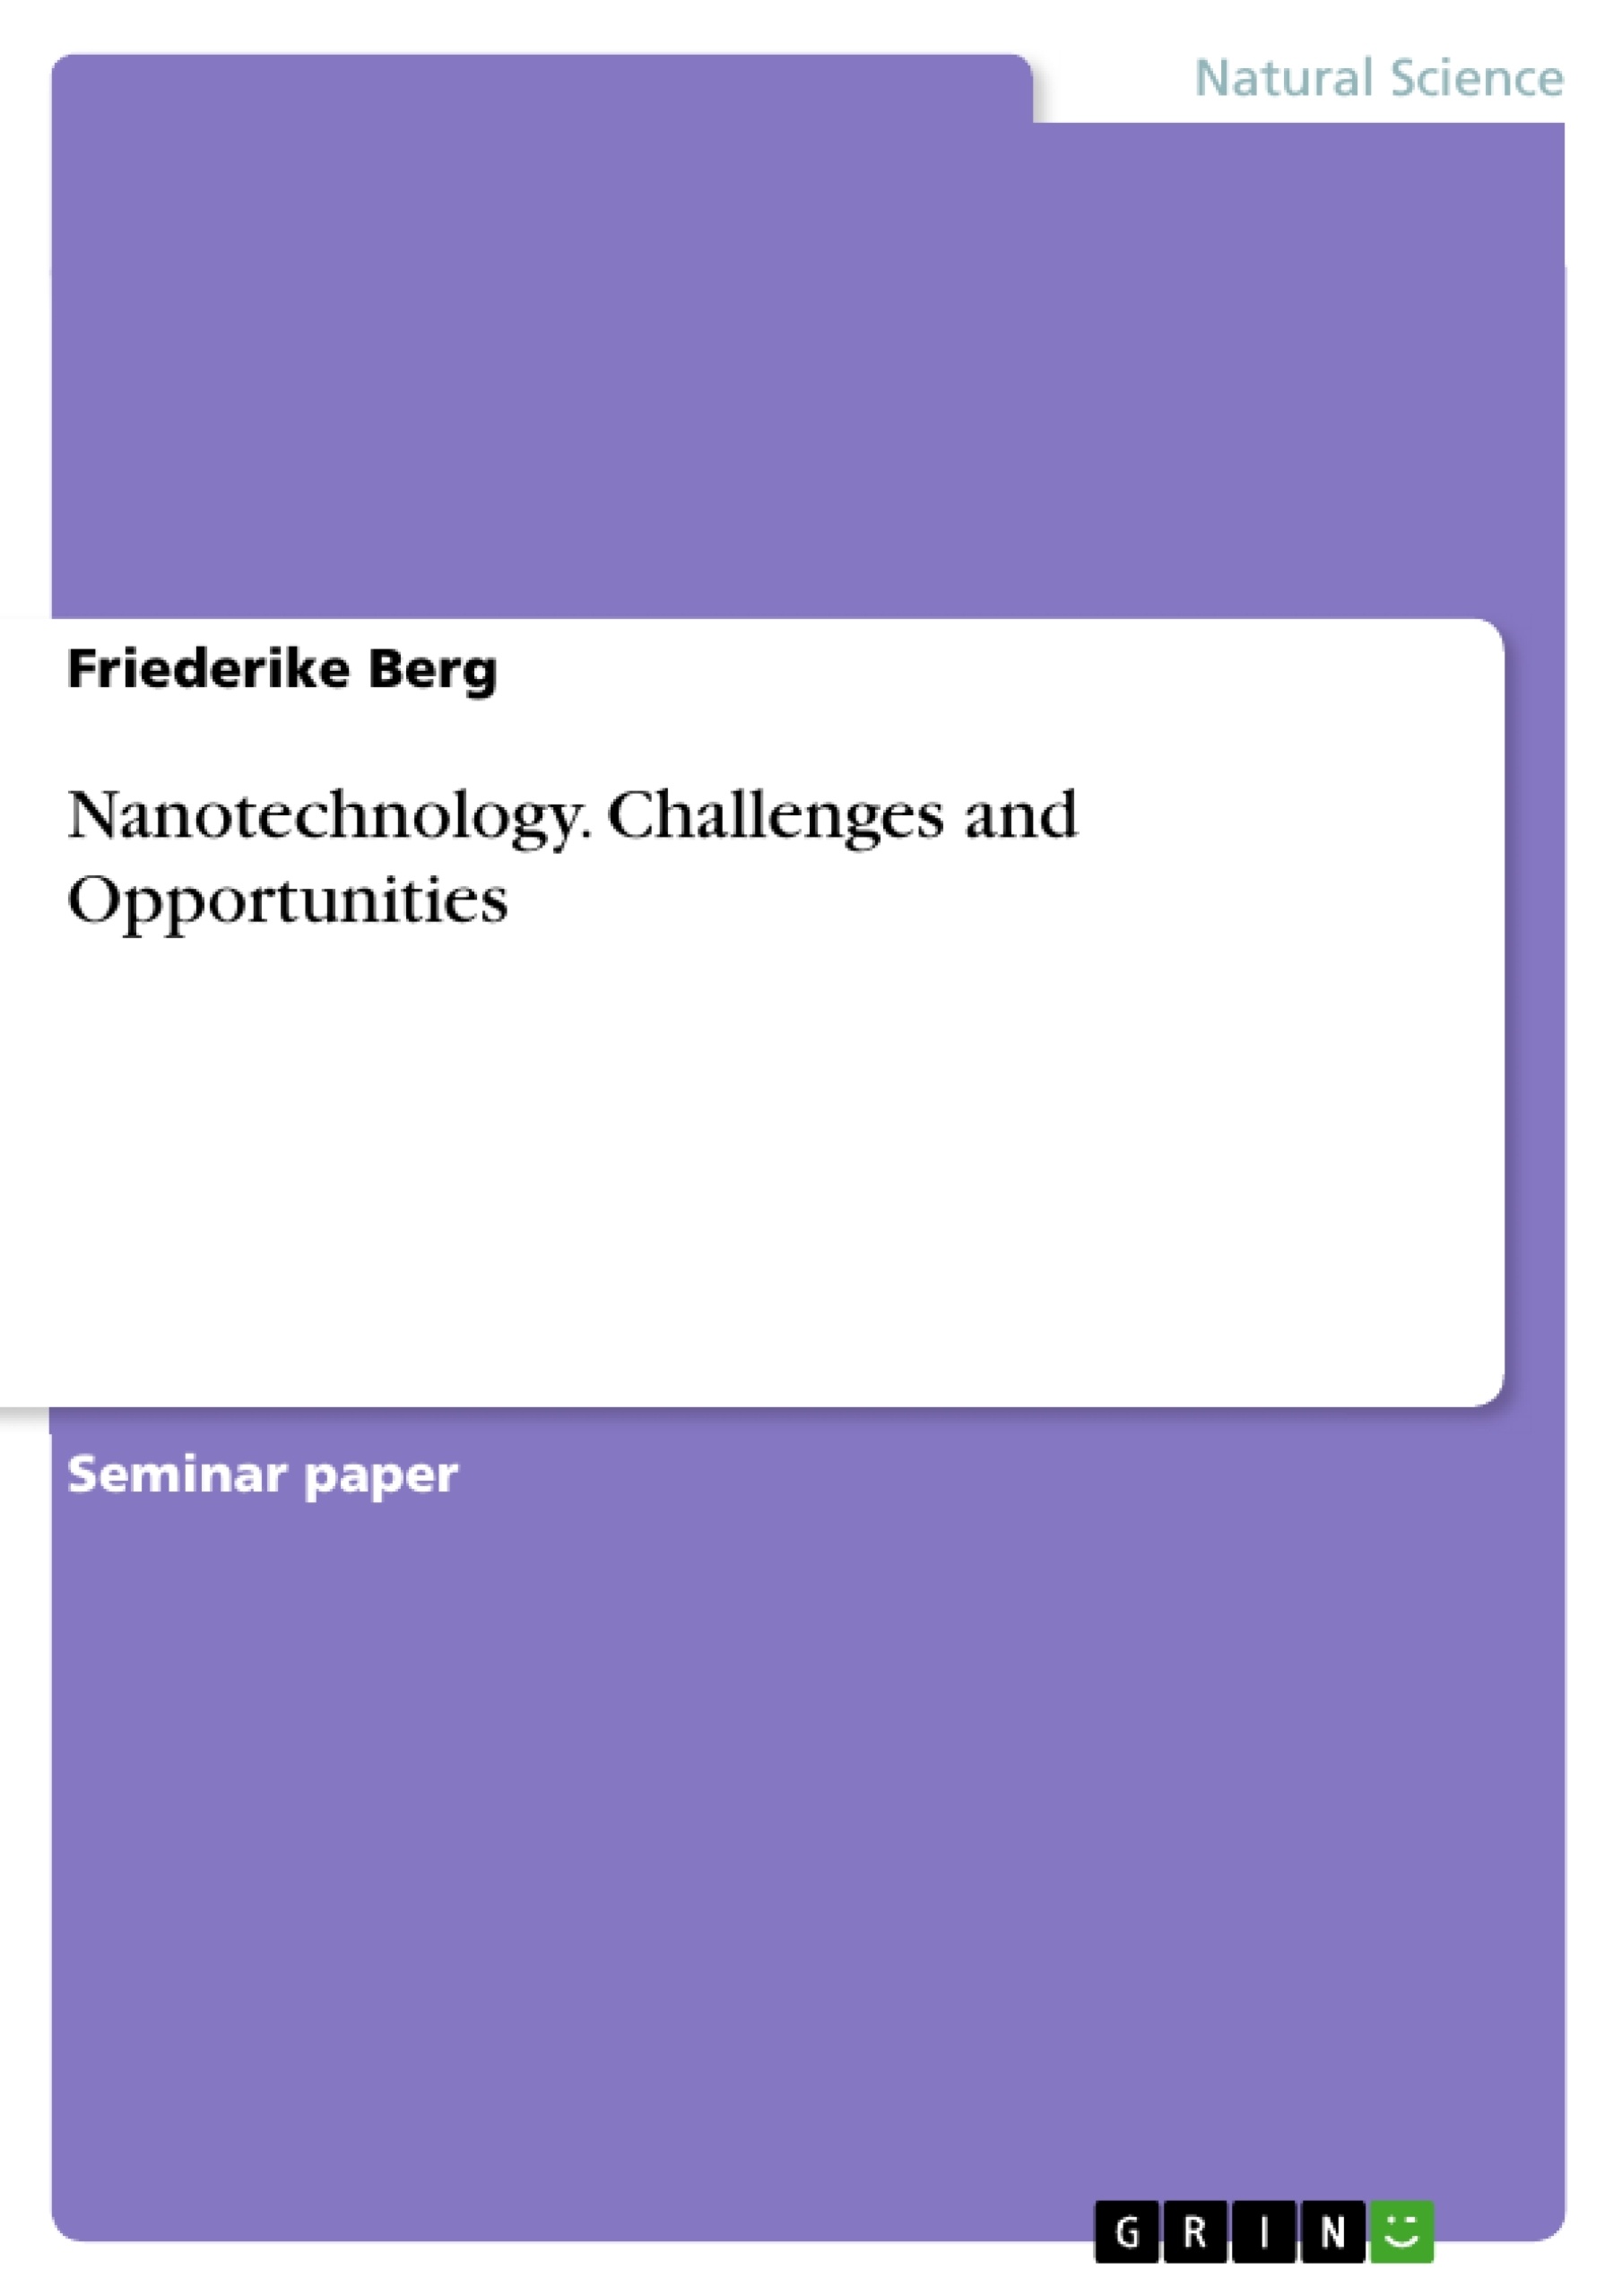 Title: Nanotechnology. Challenges and Opportunities